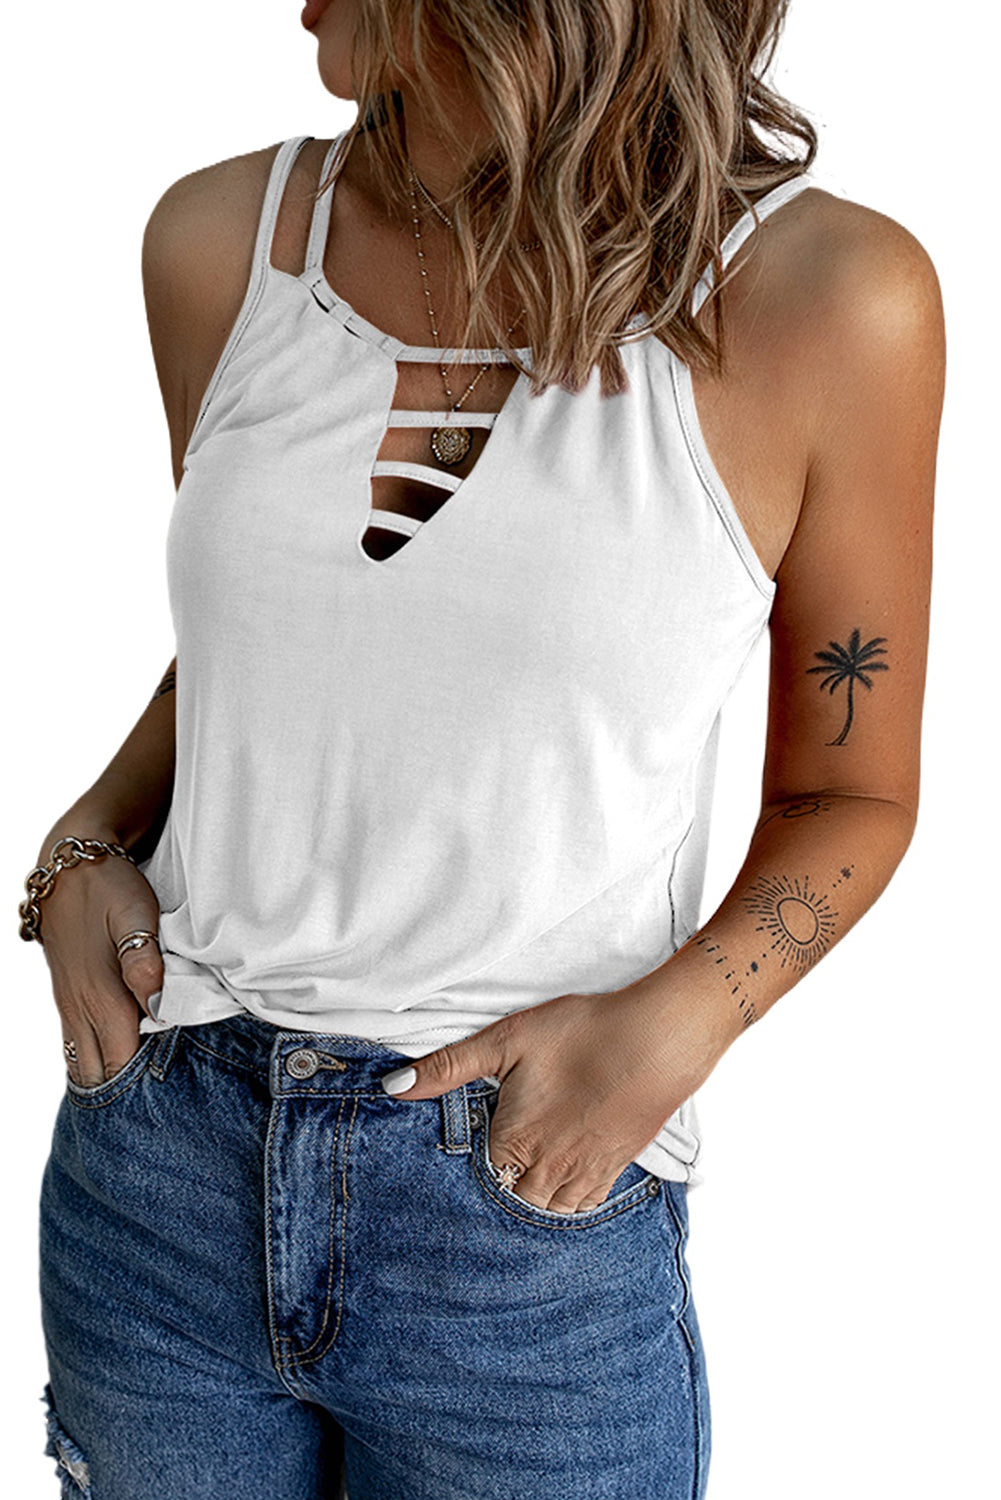 Black Basic Ladder Hollow-out Tank Top